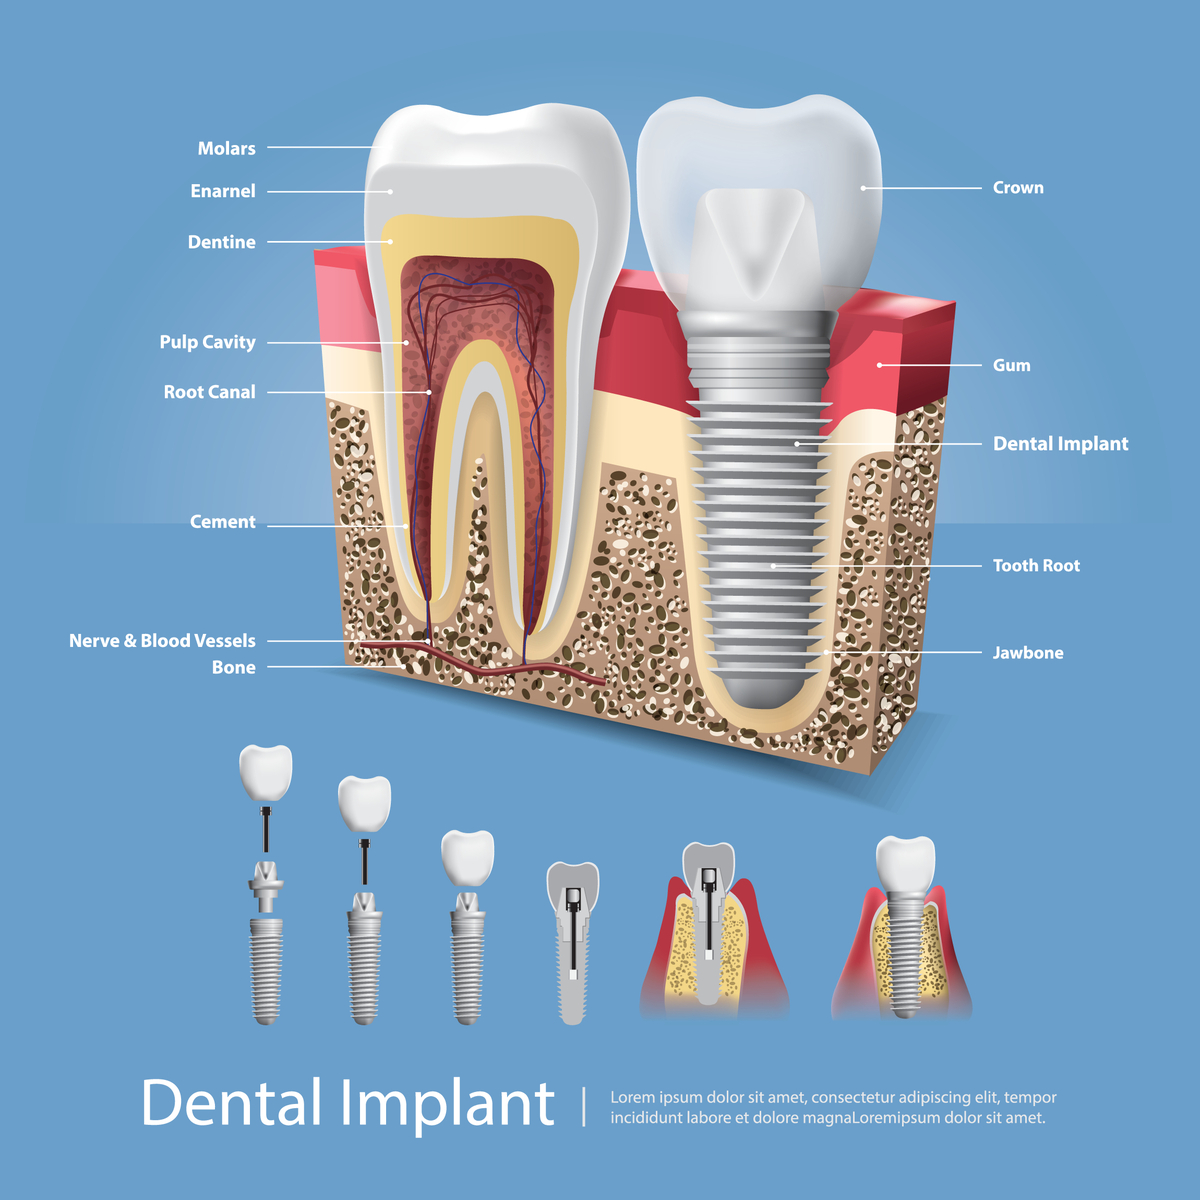 Dental Implant Maplewood, MO | Tooth Pain | Restorative Dentistry | Cosmetic Dentistry Near Maplewood, MO